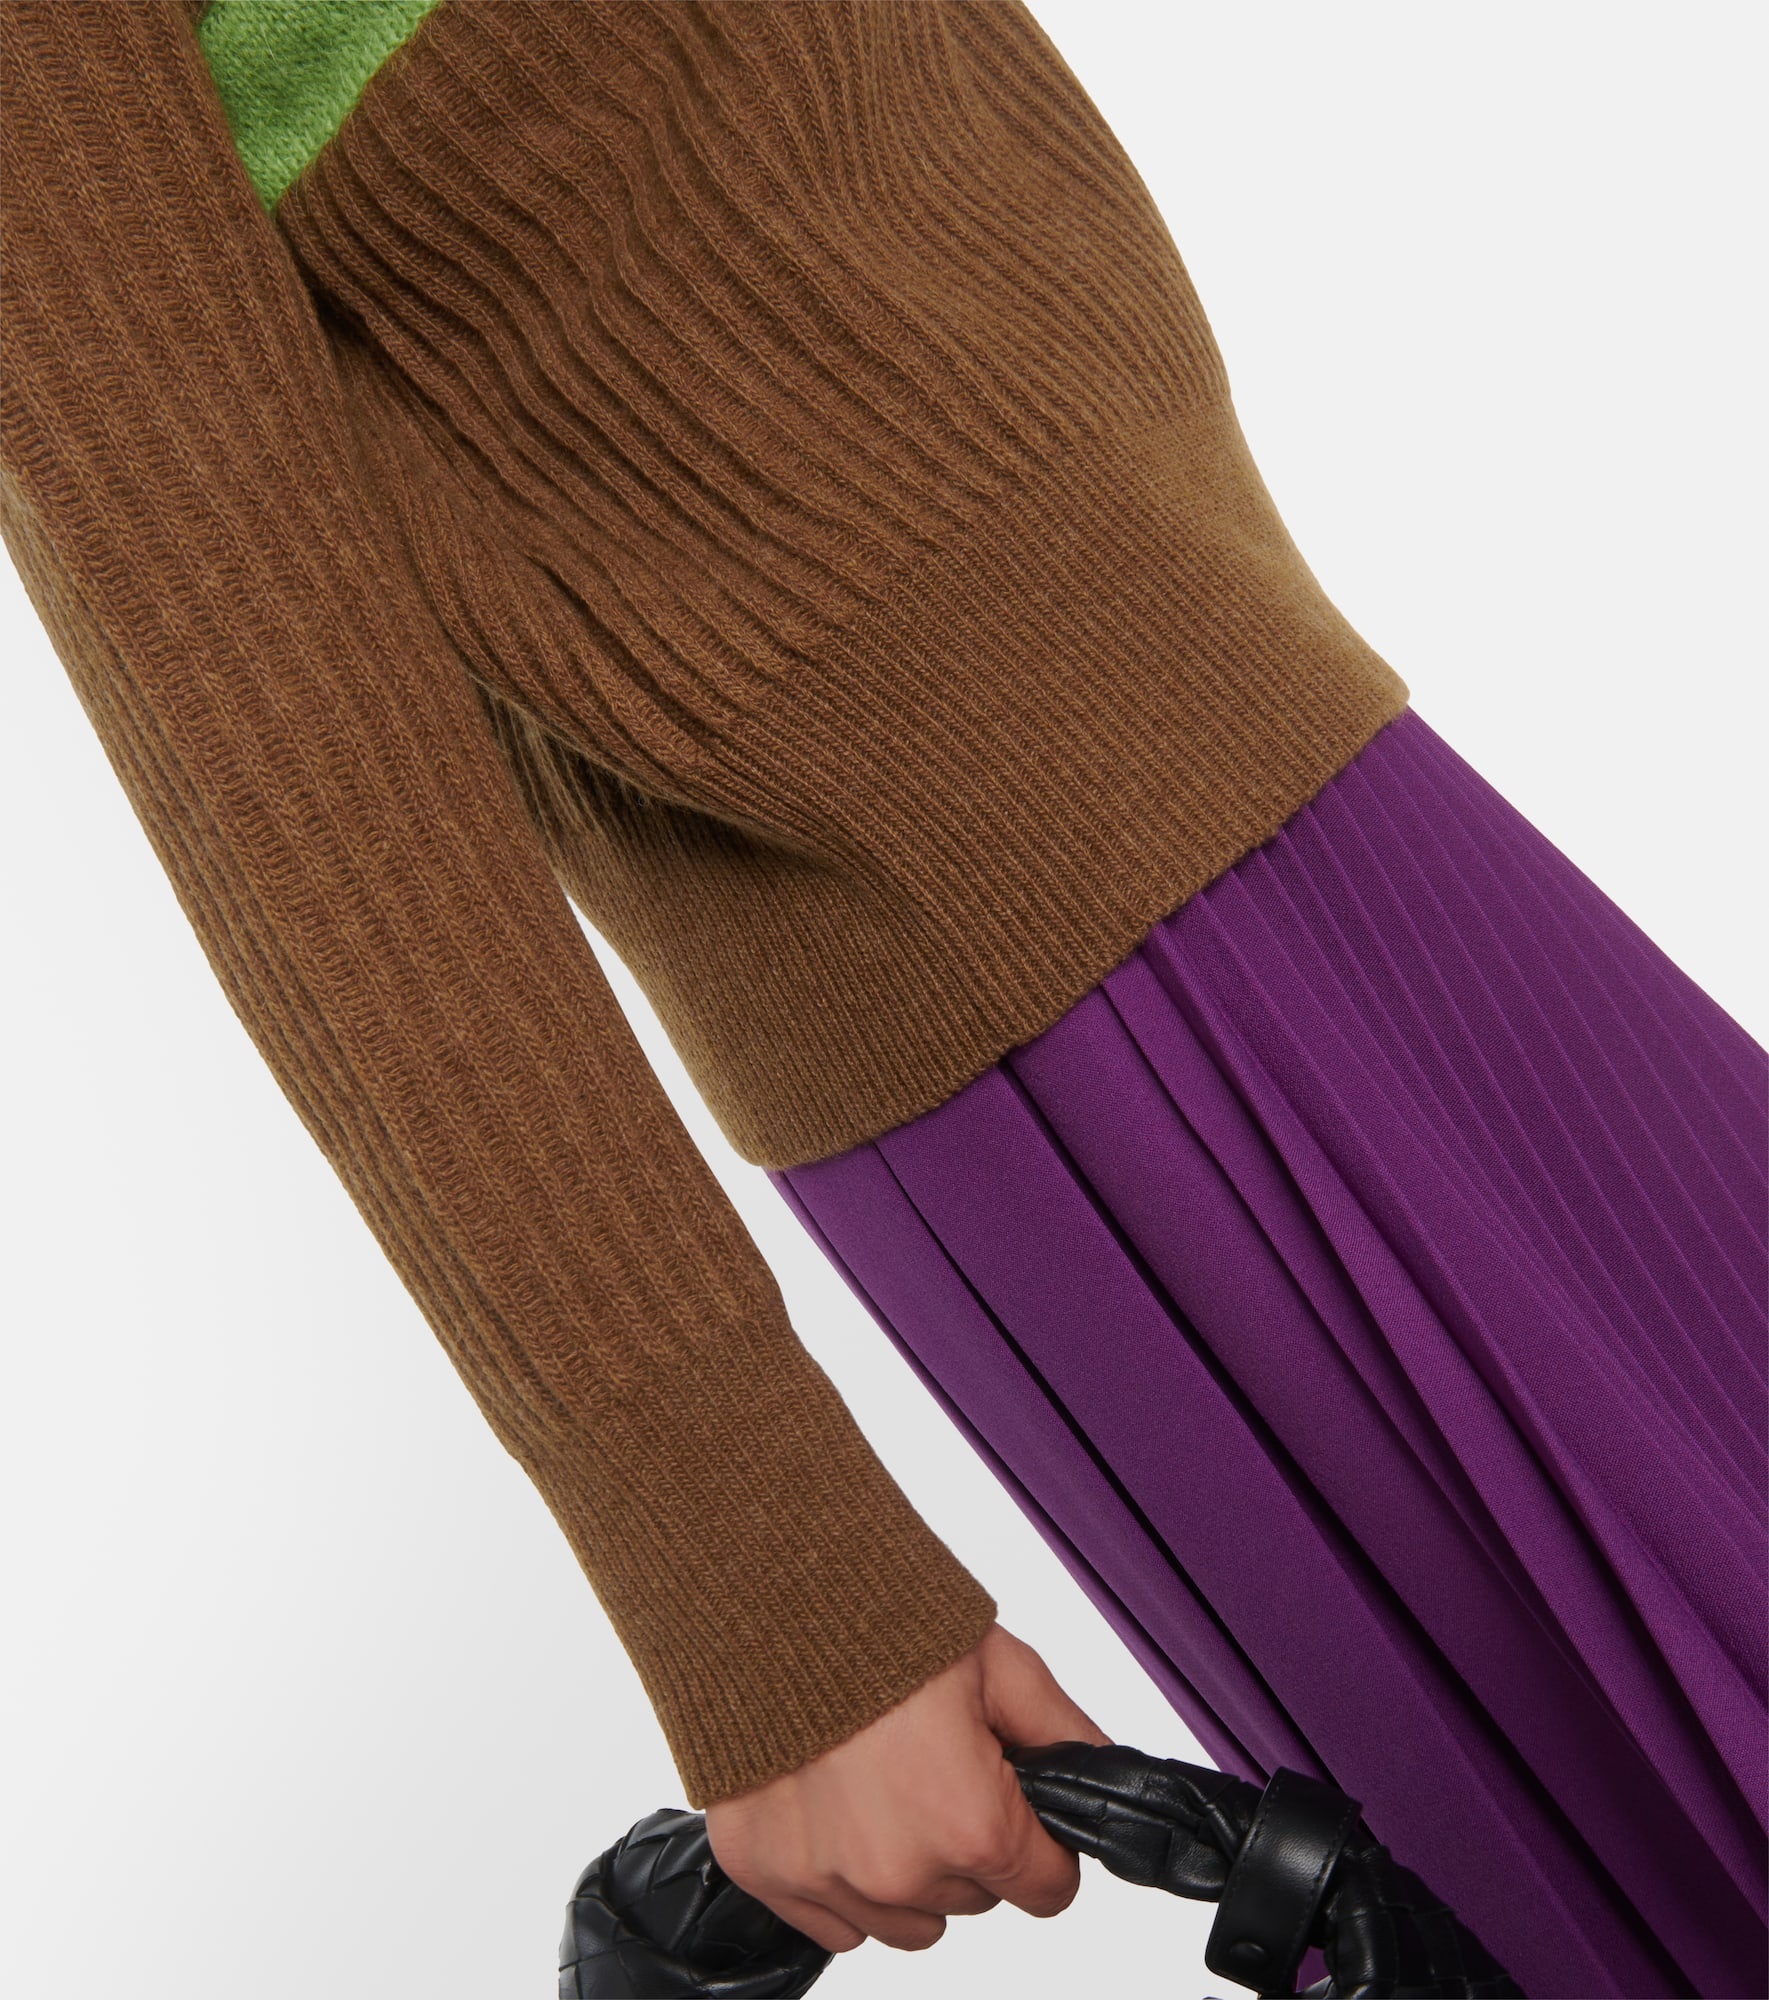 Wool and cashmere sweater - 5